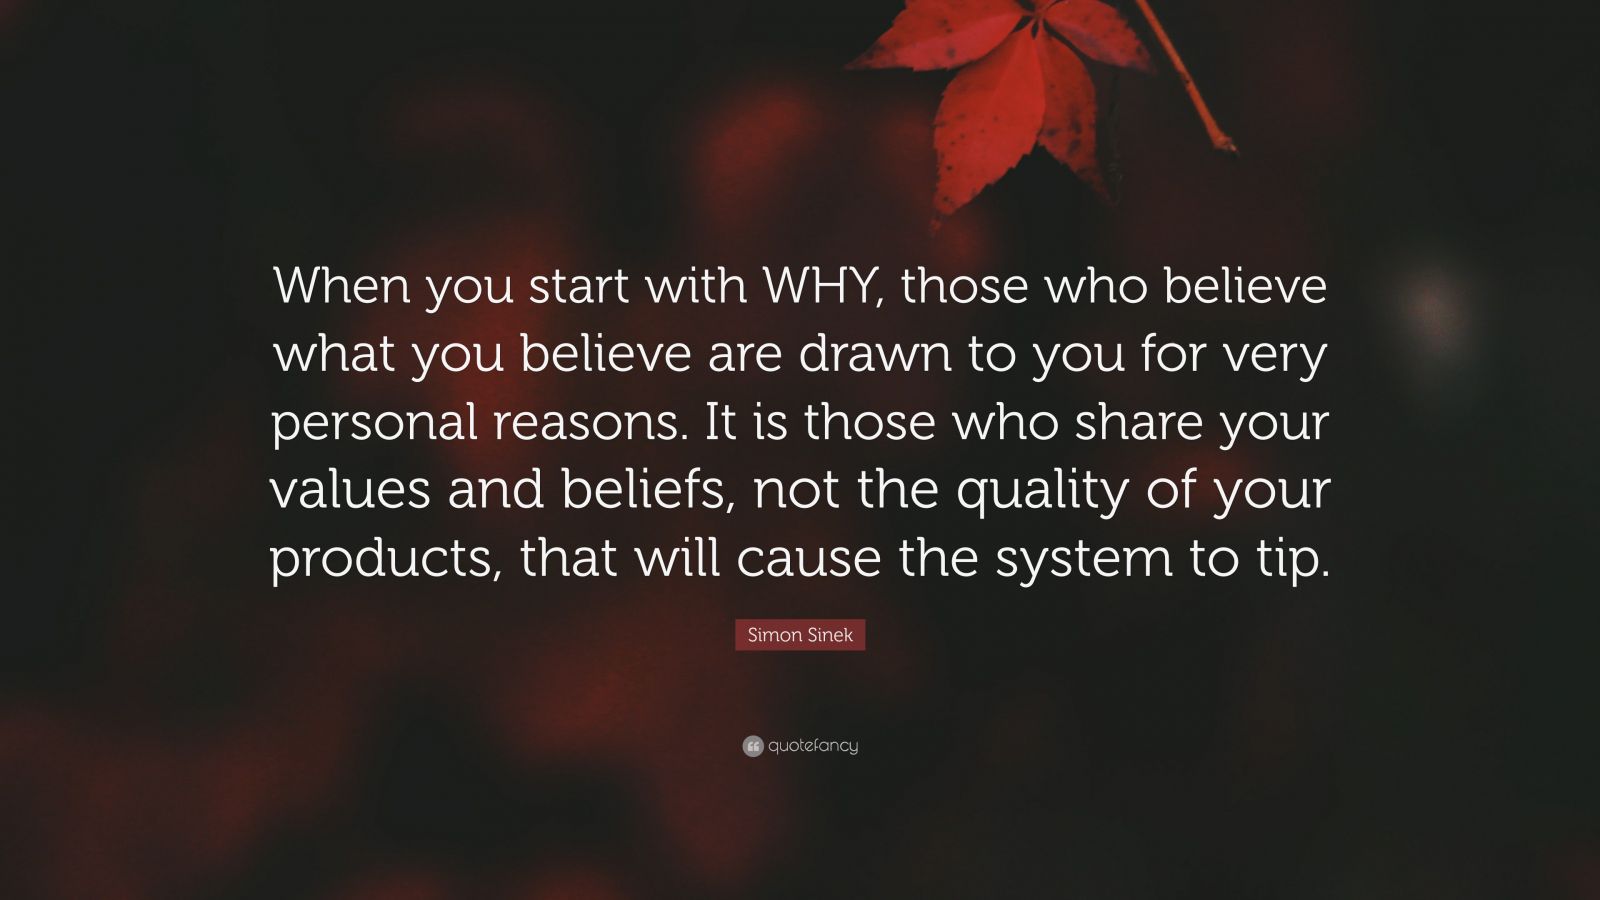 Simon Sinek Quote: “When you start with WHY, those who believe what you  believe are drawn to you for very personal reasons. It is those who ...”